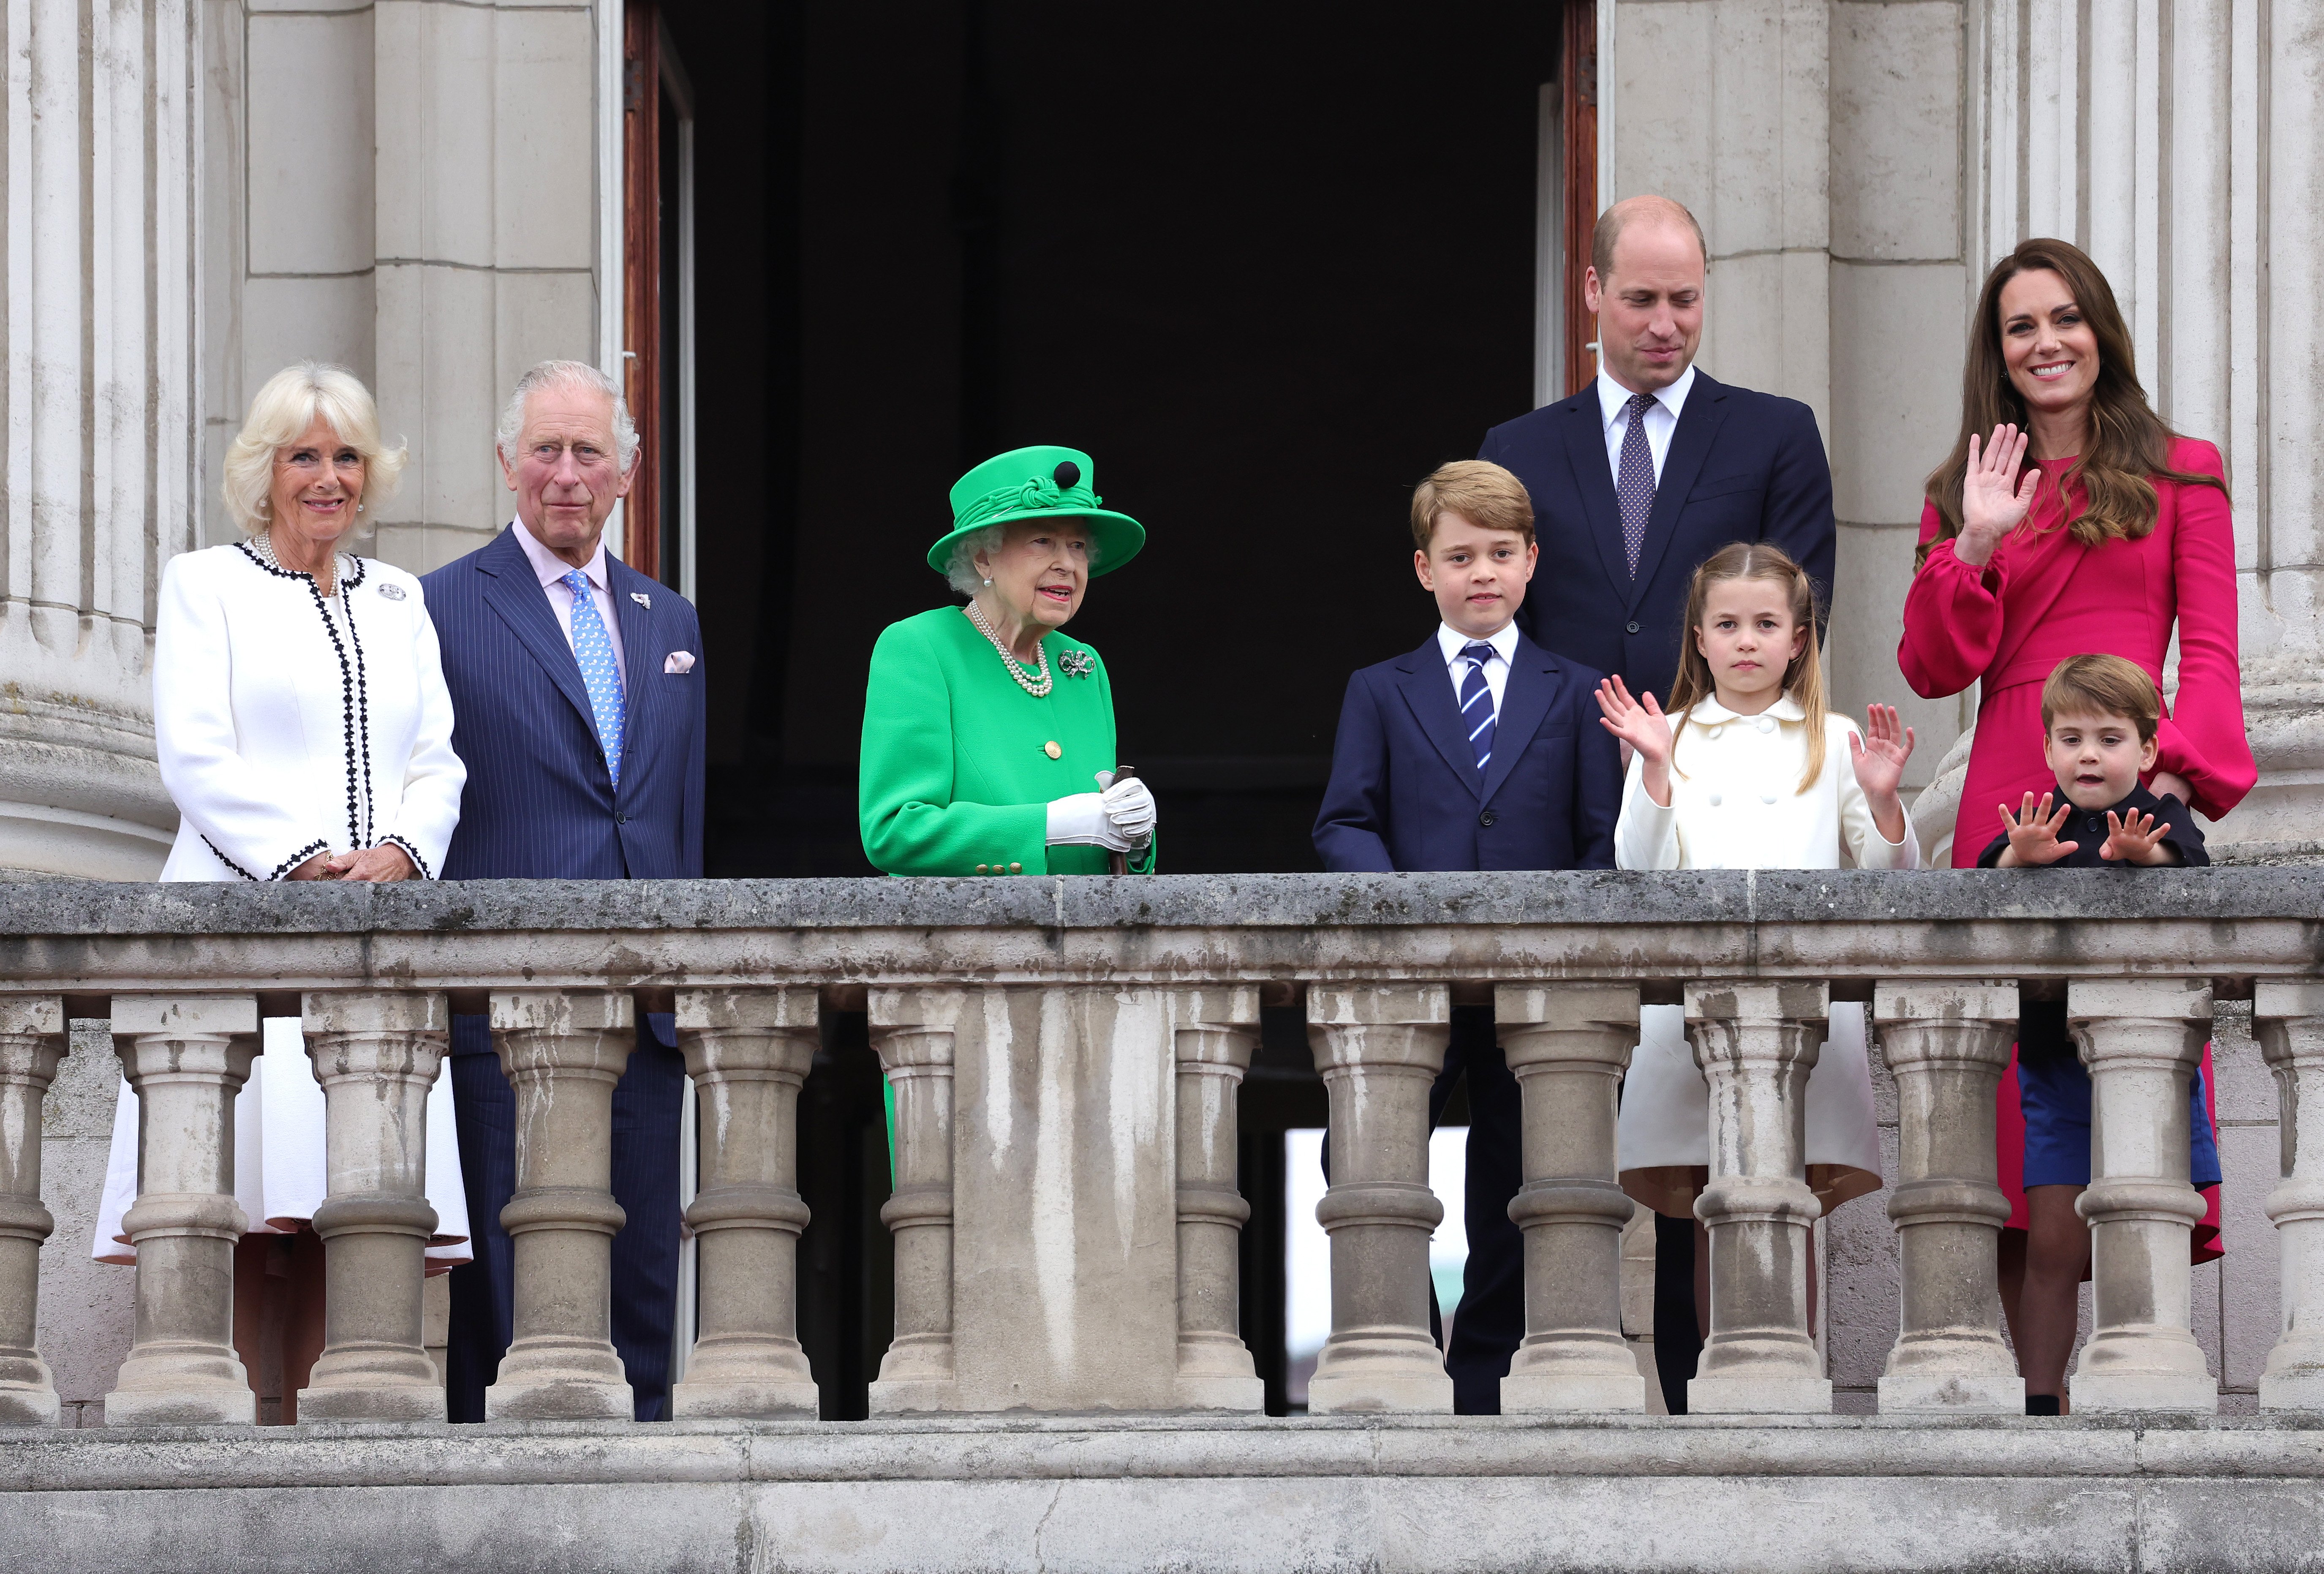 Camilla, Duchess of Cornwall, Prince Charles, Prince of Wales, Queen Elizabeth II, Prince George of Cambridge, Prince William, Duke of Cambridge, Princess Charlotte of Cambridge, Catherine, Duchess of Cambridge and Prince Louis of Cambridge on the balcony of Buckingham Palace during the Platinum Jubilee Pageant on June 05, 2022 in London, England. | Source: Getty Images